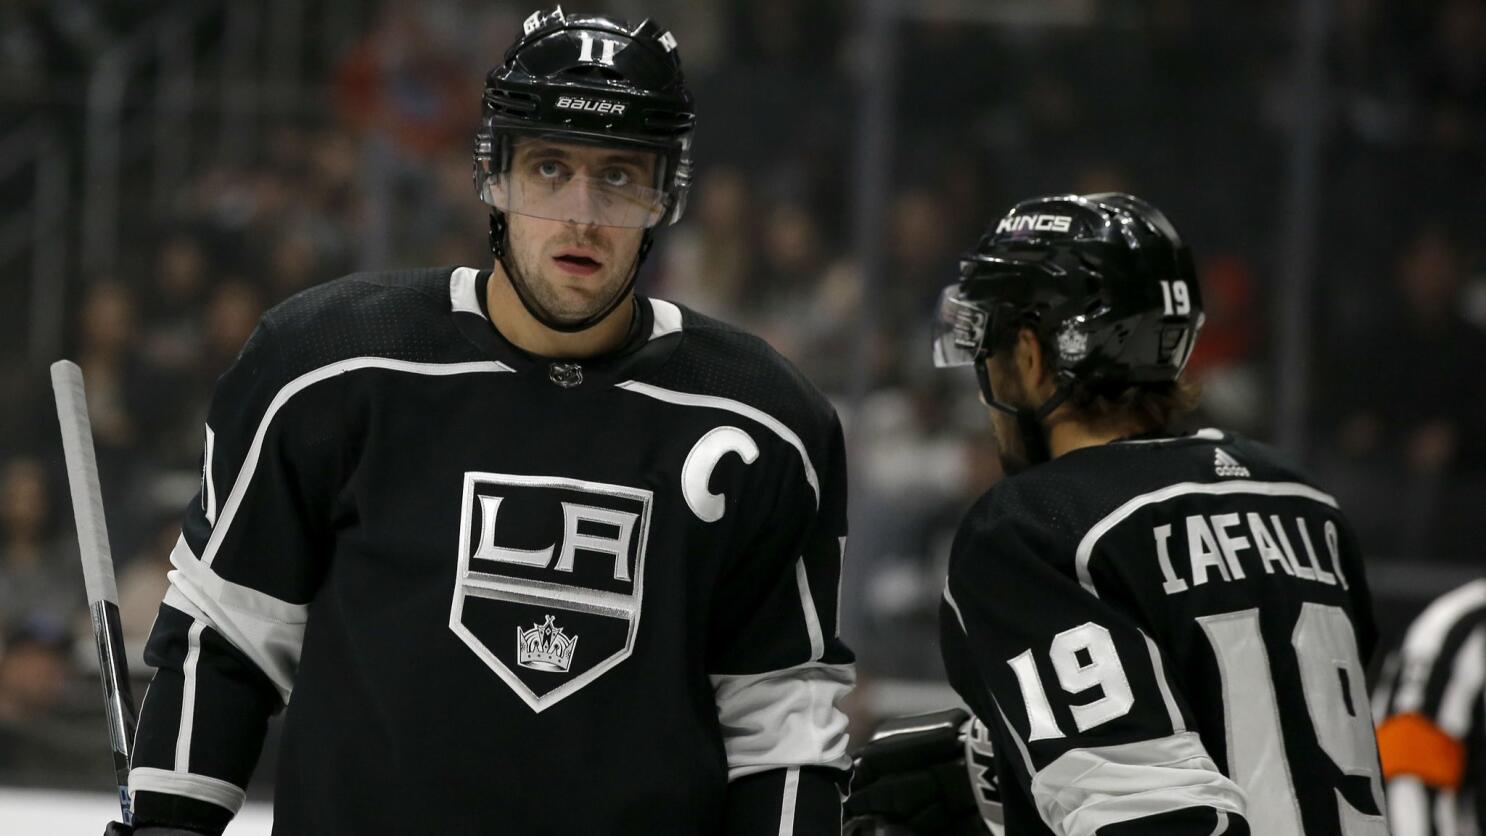 LA Kings - We are saddened to hear the recent events faced by